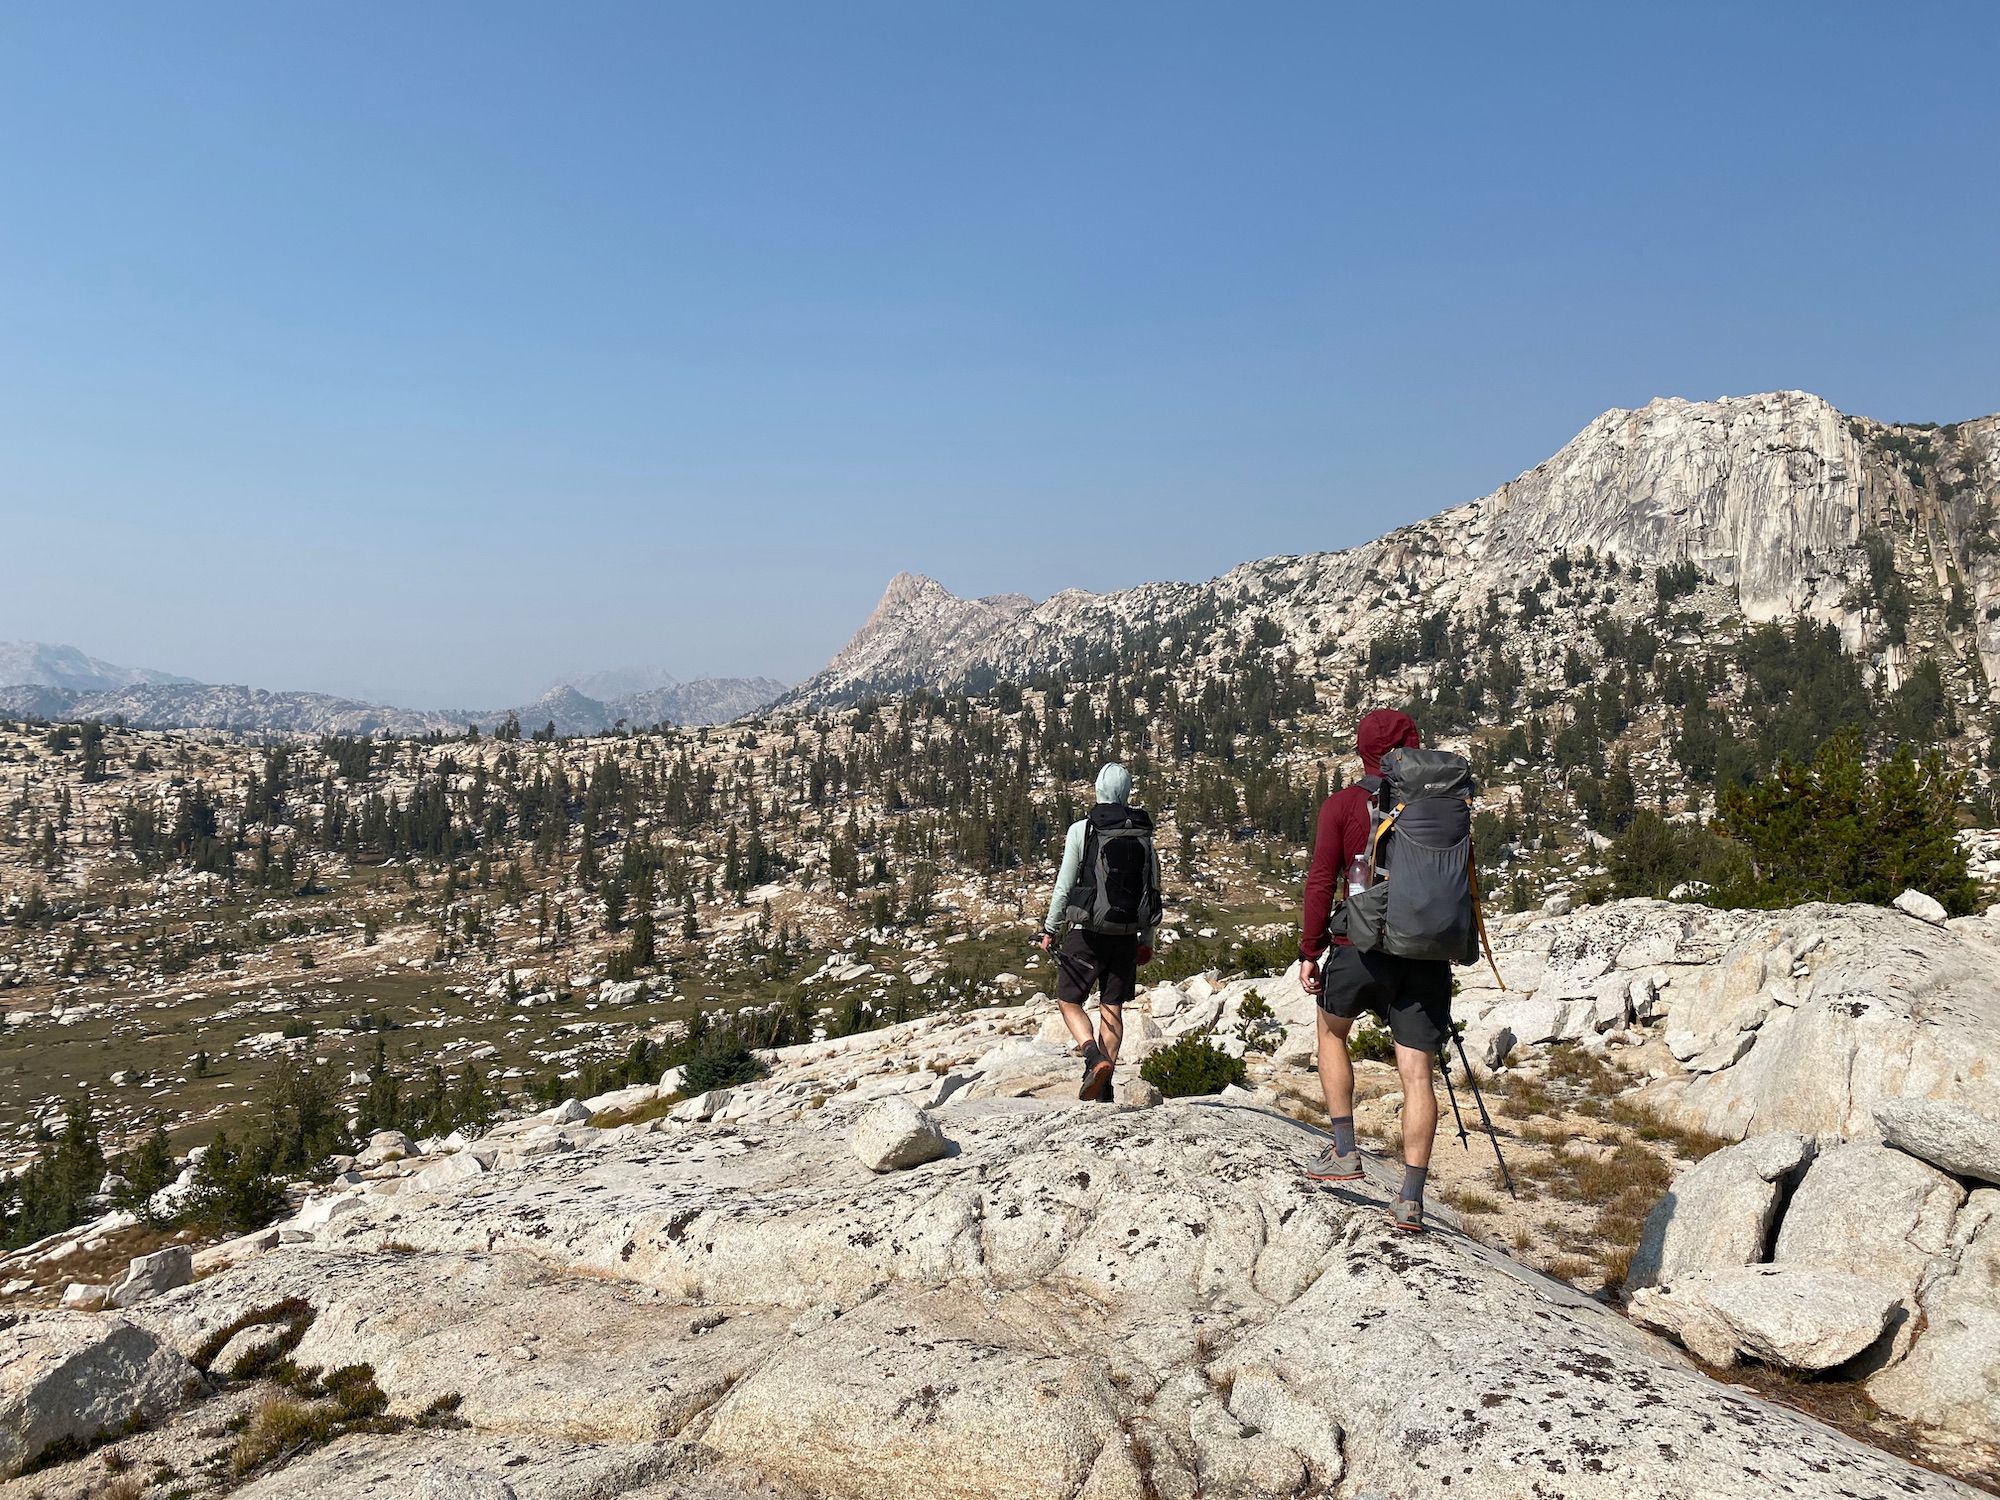 Two backpackers walking in a high alpine terrain with granite and small trees.